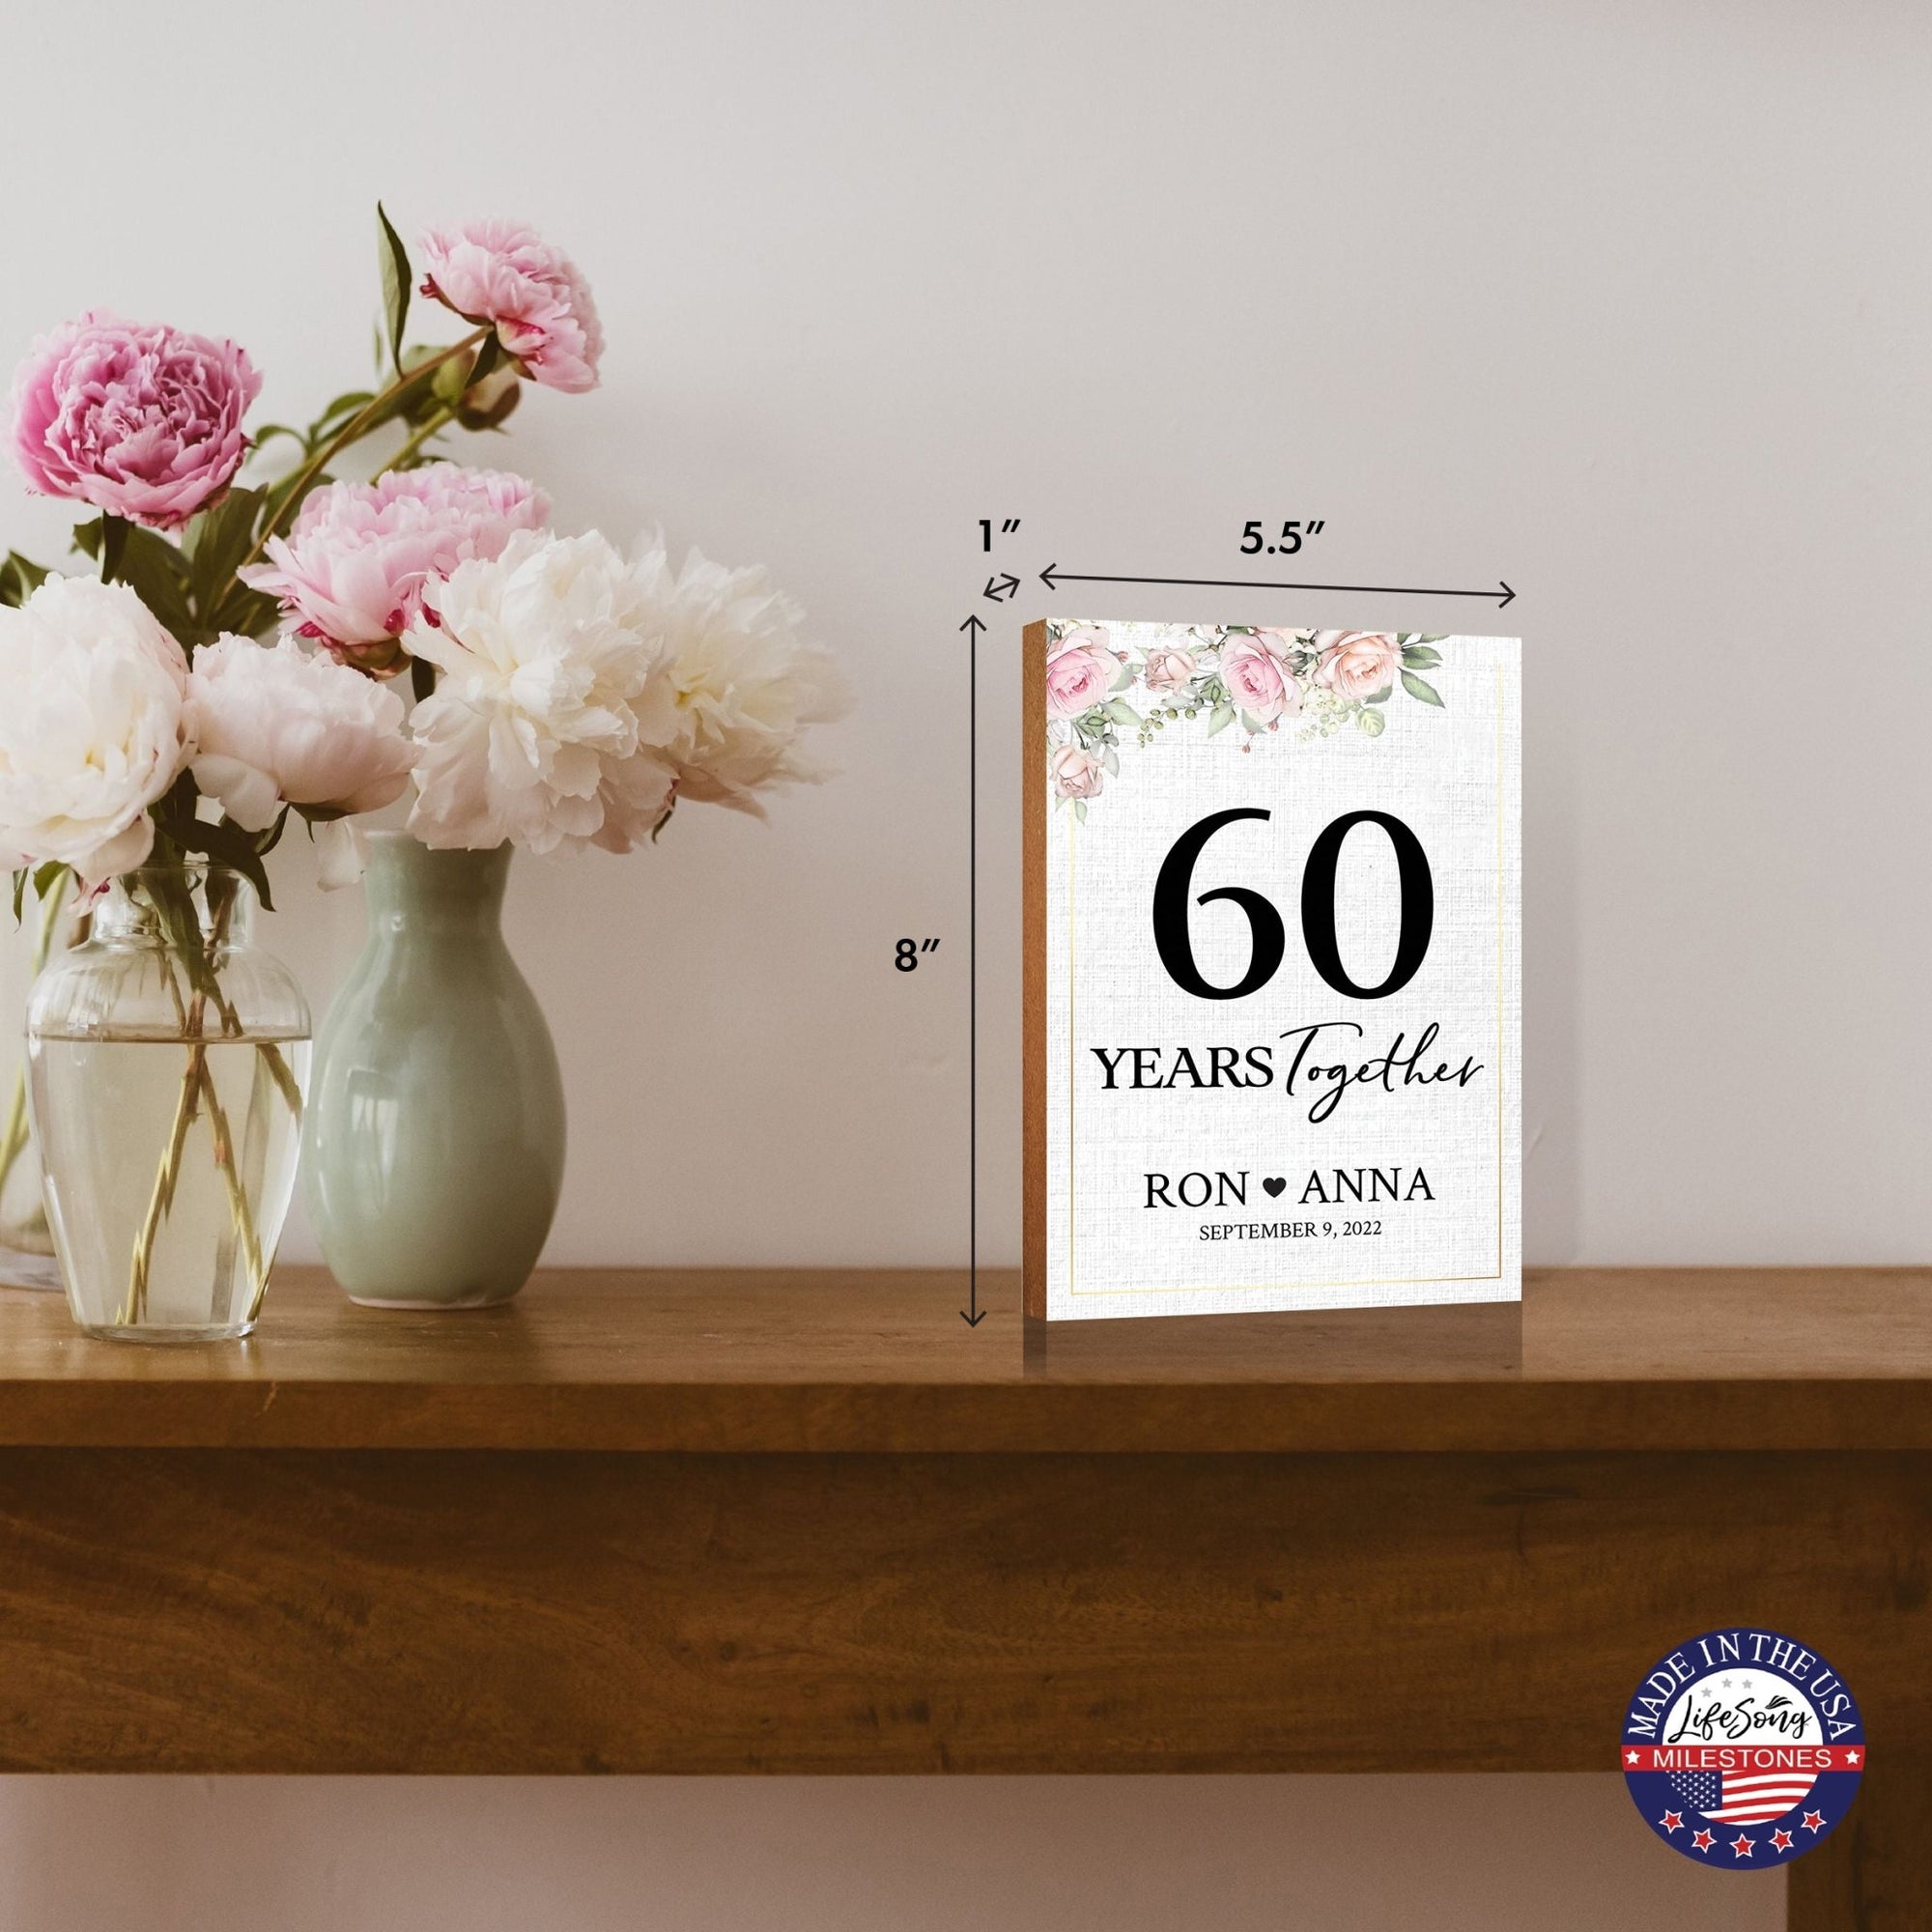 Personalized Unique Shelf Décor and Tabletop Signs Gifts for 60th Wedding Anniversary - LifeSong Milestones